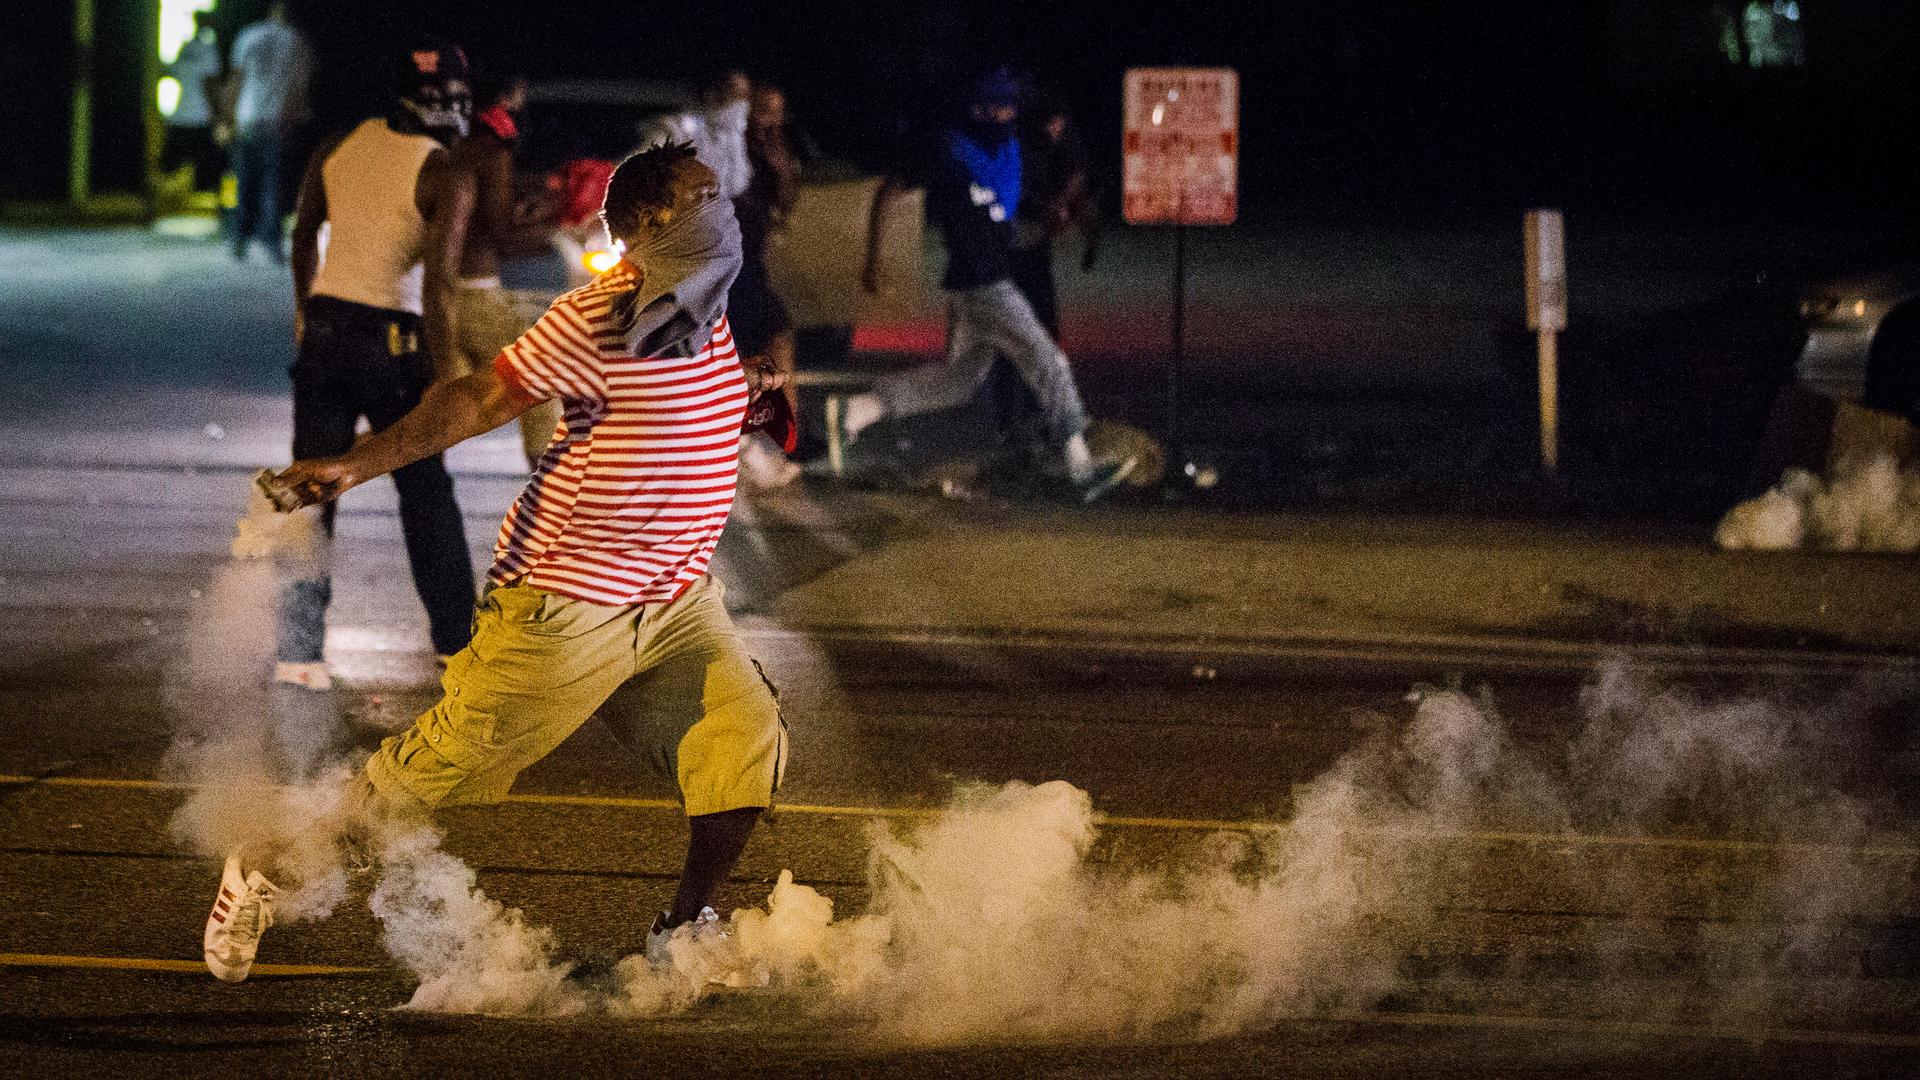 A protester picks up a gas canister to throw back towards the police after tear gas was fired at demonstrators during a protest in Ferguson, Missouri.